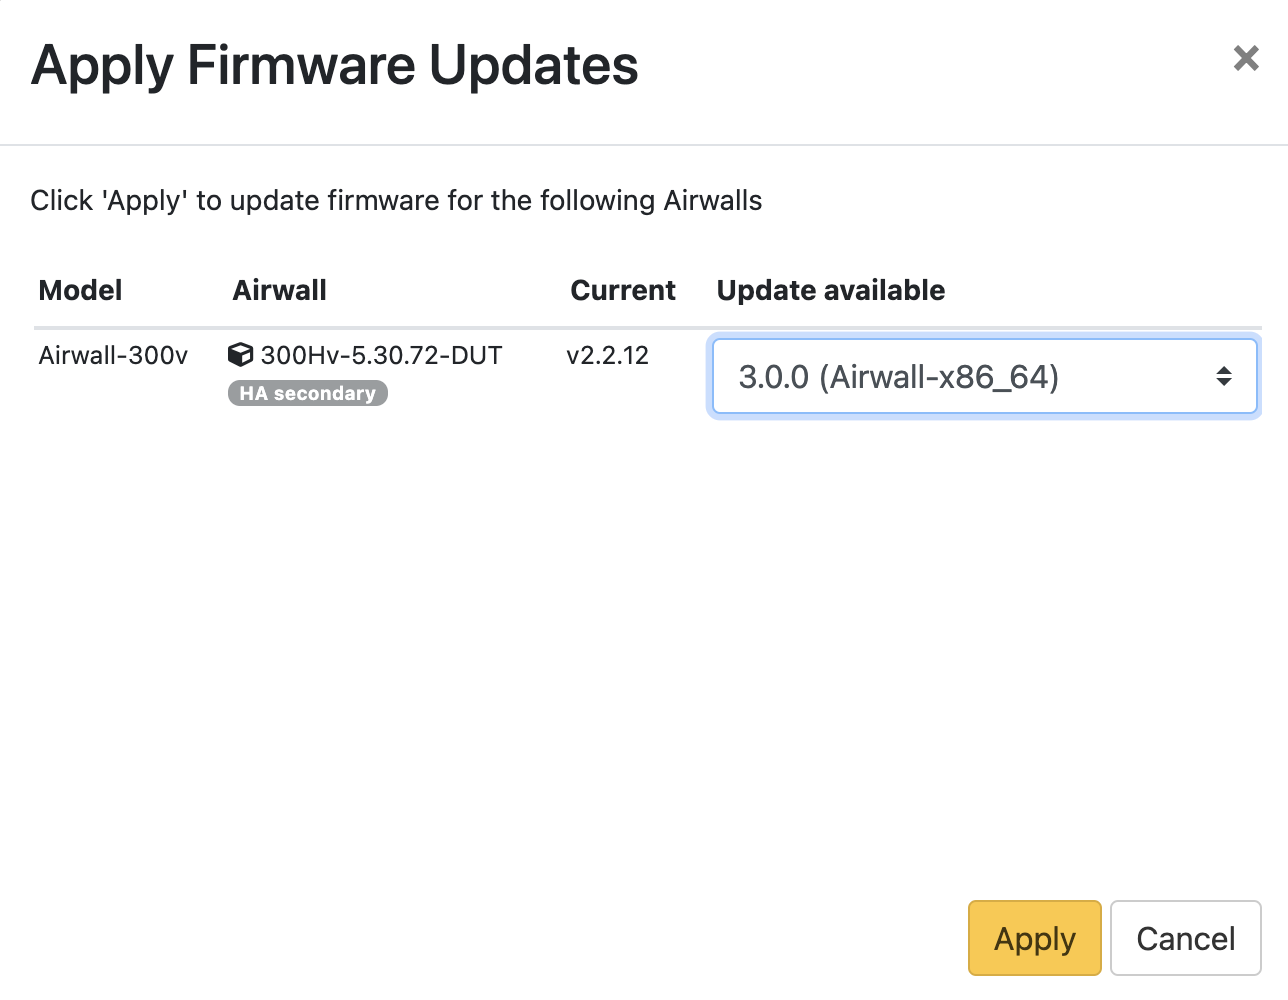 Apply Firmware Updates dialog showing an update available